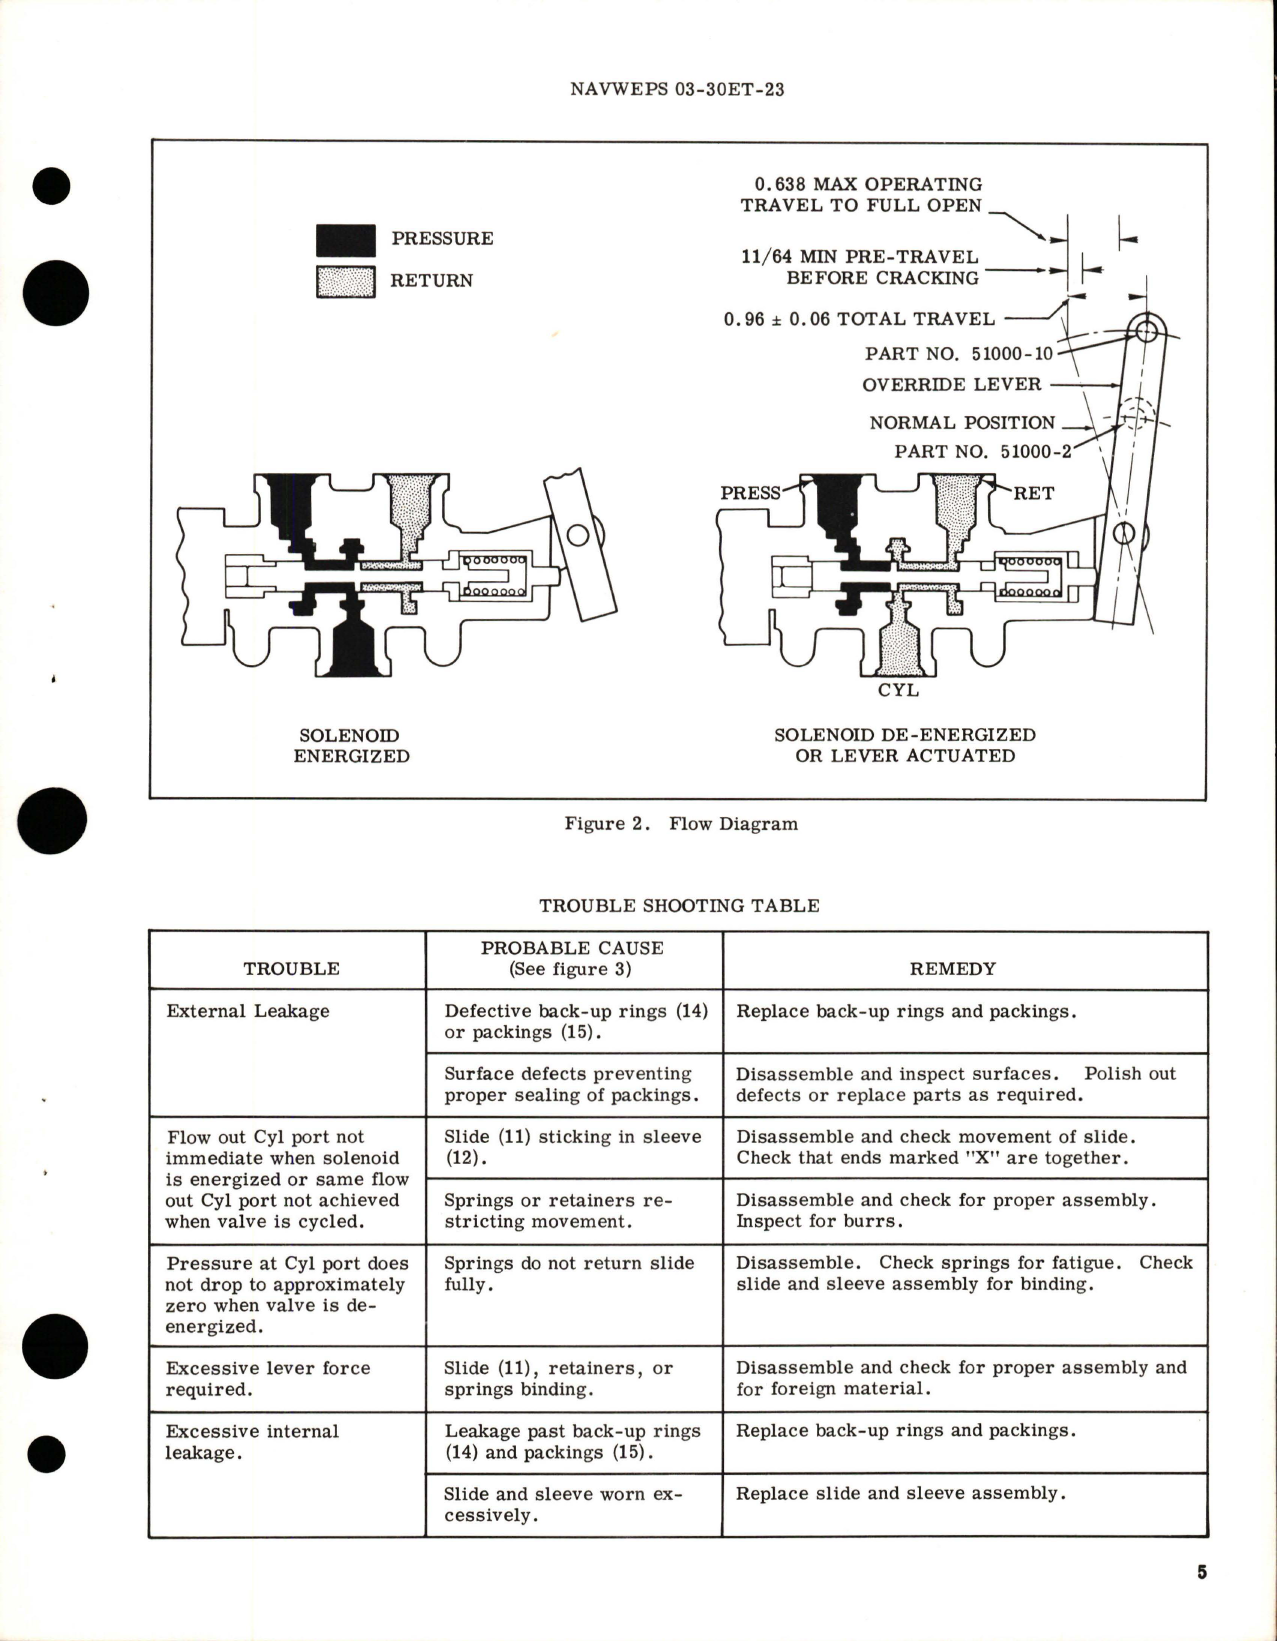 Sample page 5 from AirCorps Library document: Overhaul Instructions with Parts Breakdown for Hydraulic Solenoid Control Valve - Parts 51000-2 and 51000-10